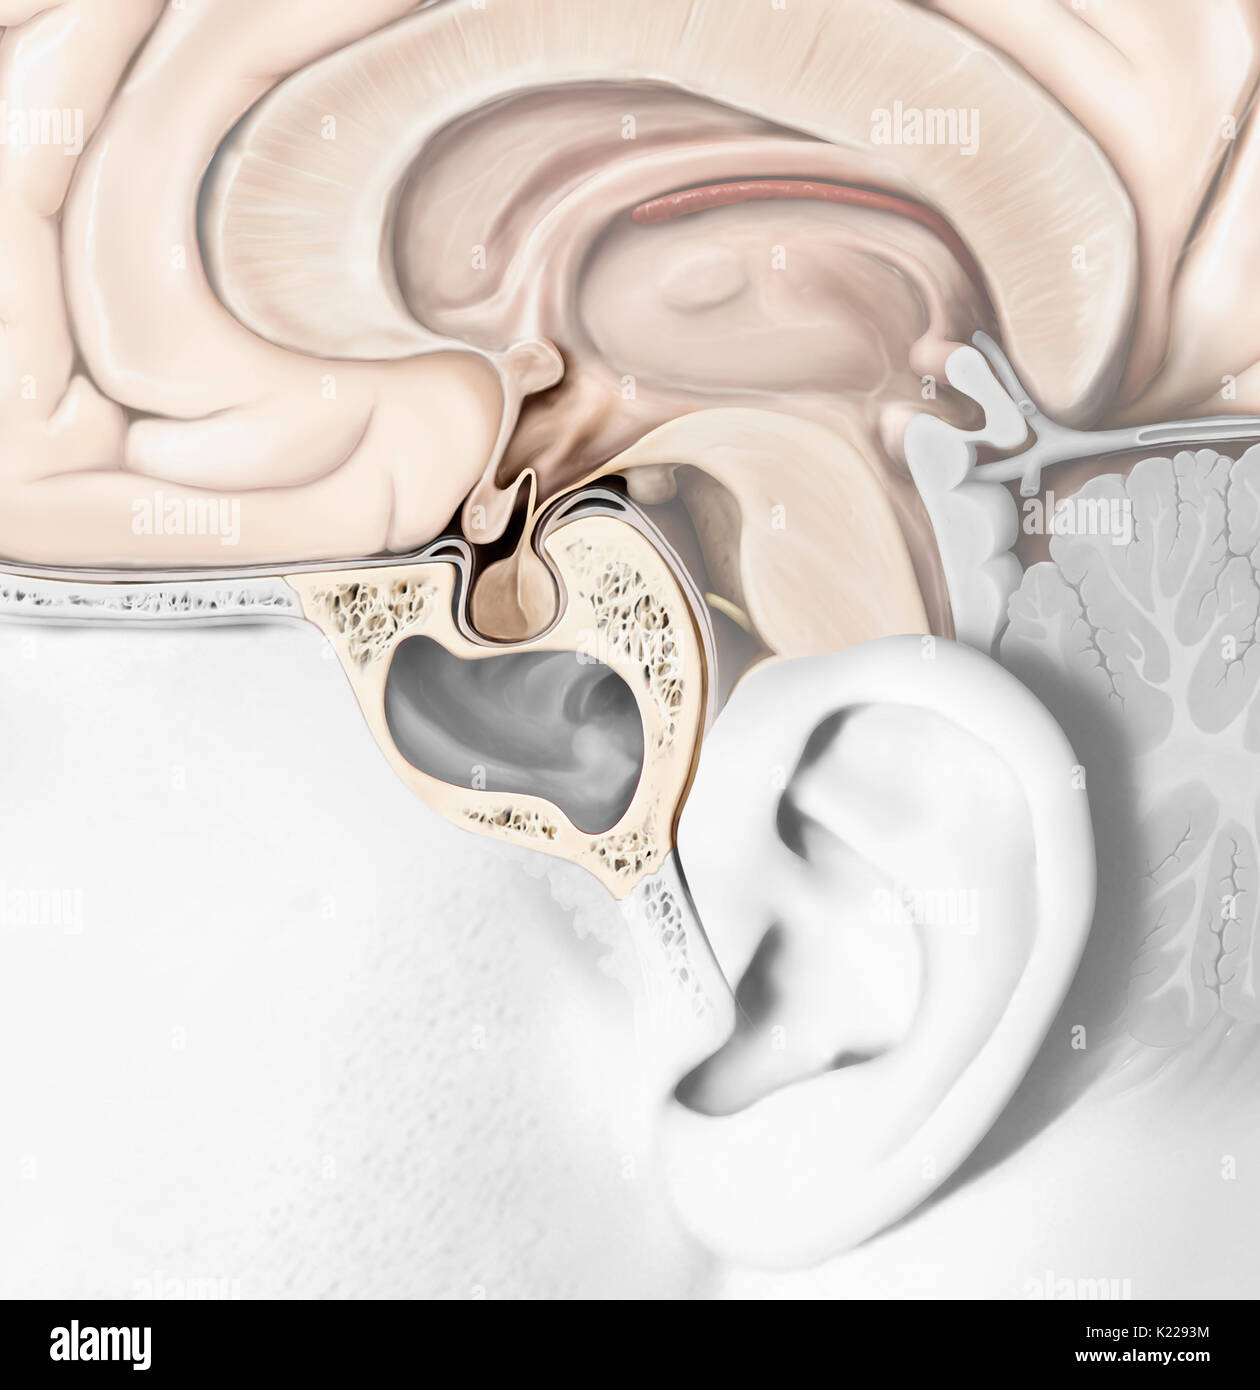 The pituitary gland consists of two lobes, the adenopituitary and the neuropituitary. The adenohypophysis secretes the growth hormone and hormones performing a regulatory function on the other endocrine glands. Stock Photo